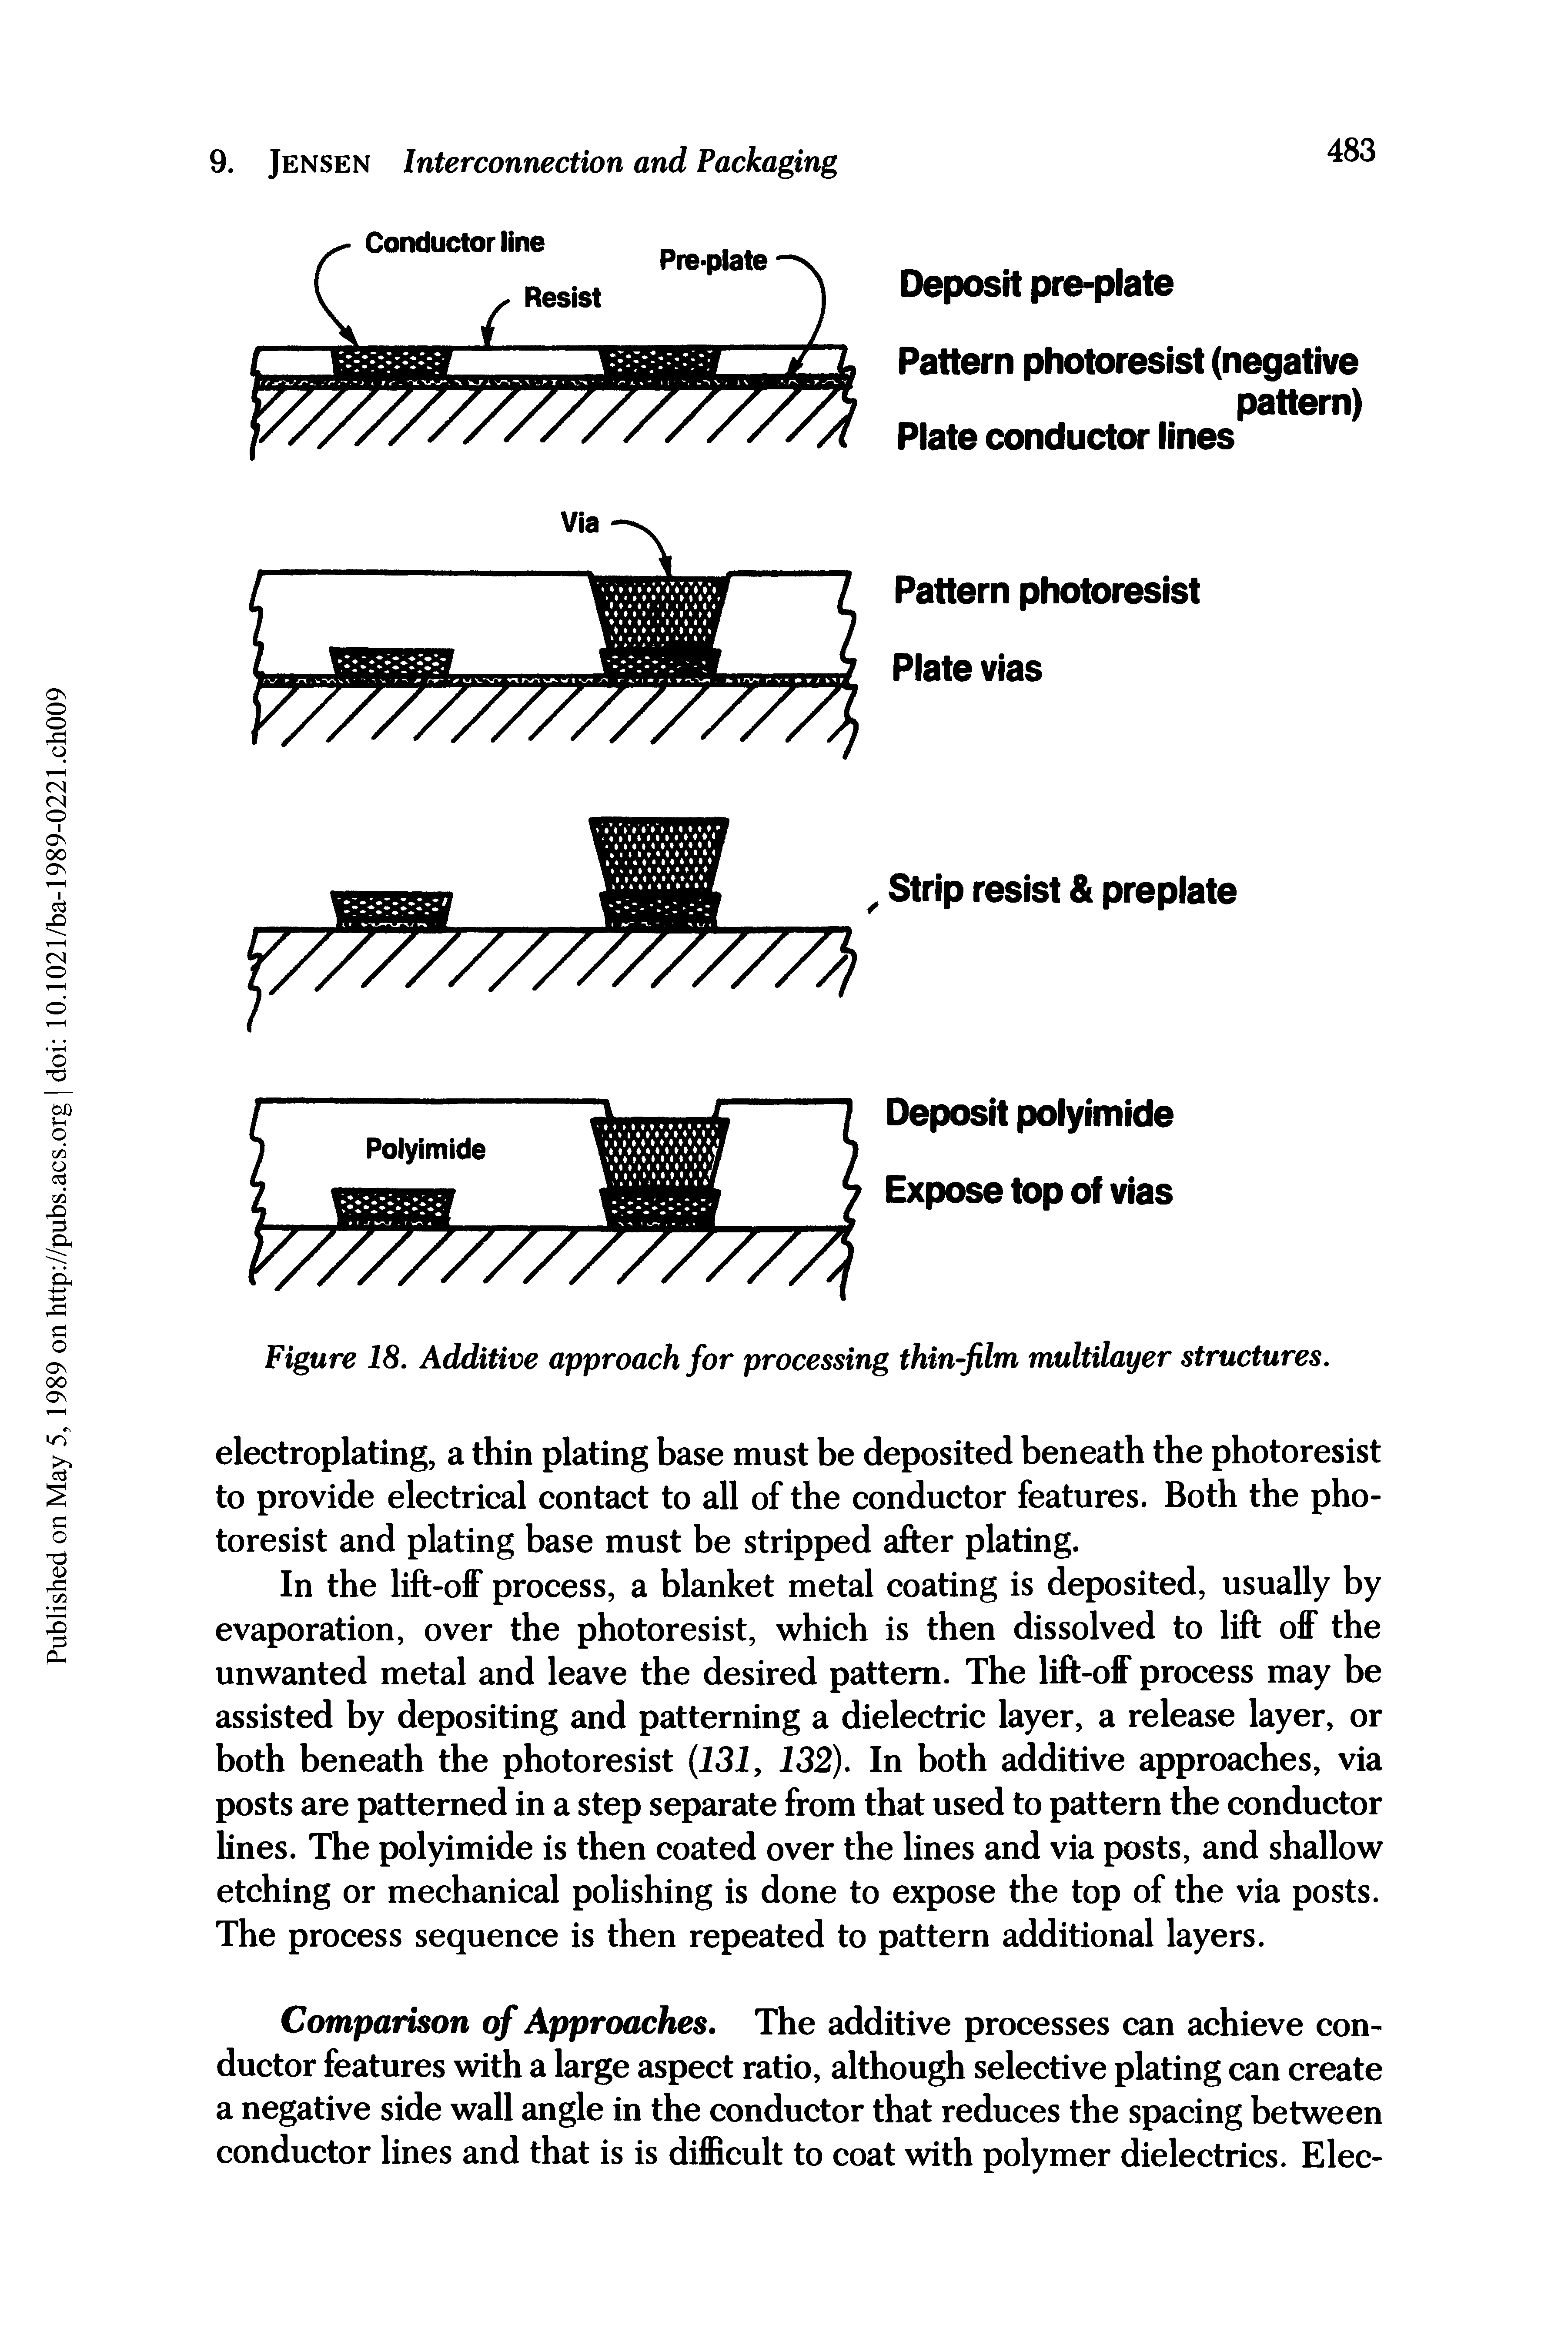 Figure 18. Additive approach for processing thin-film multilayer structures.